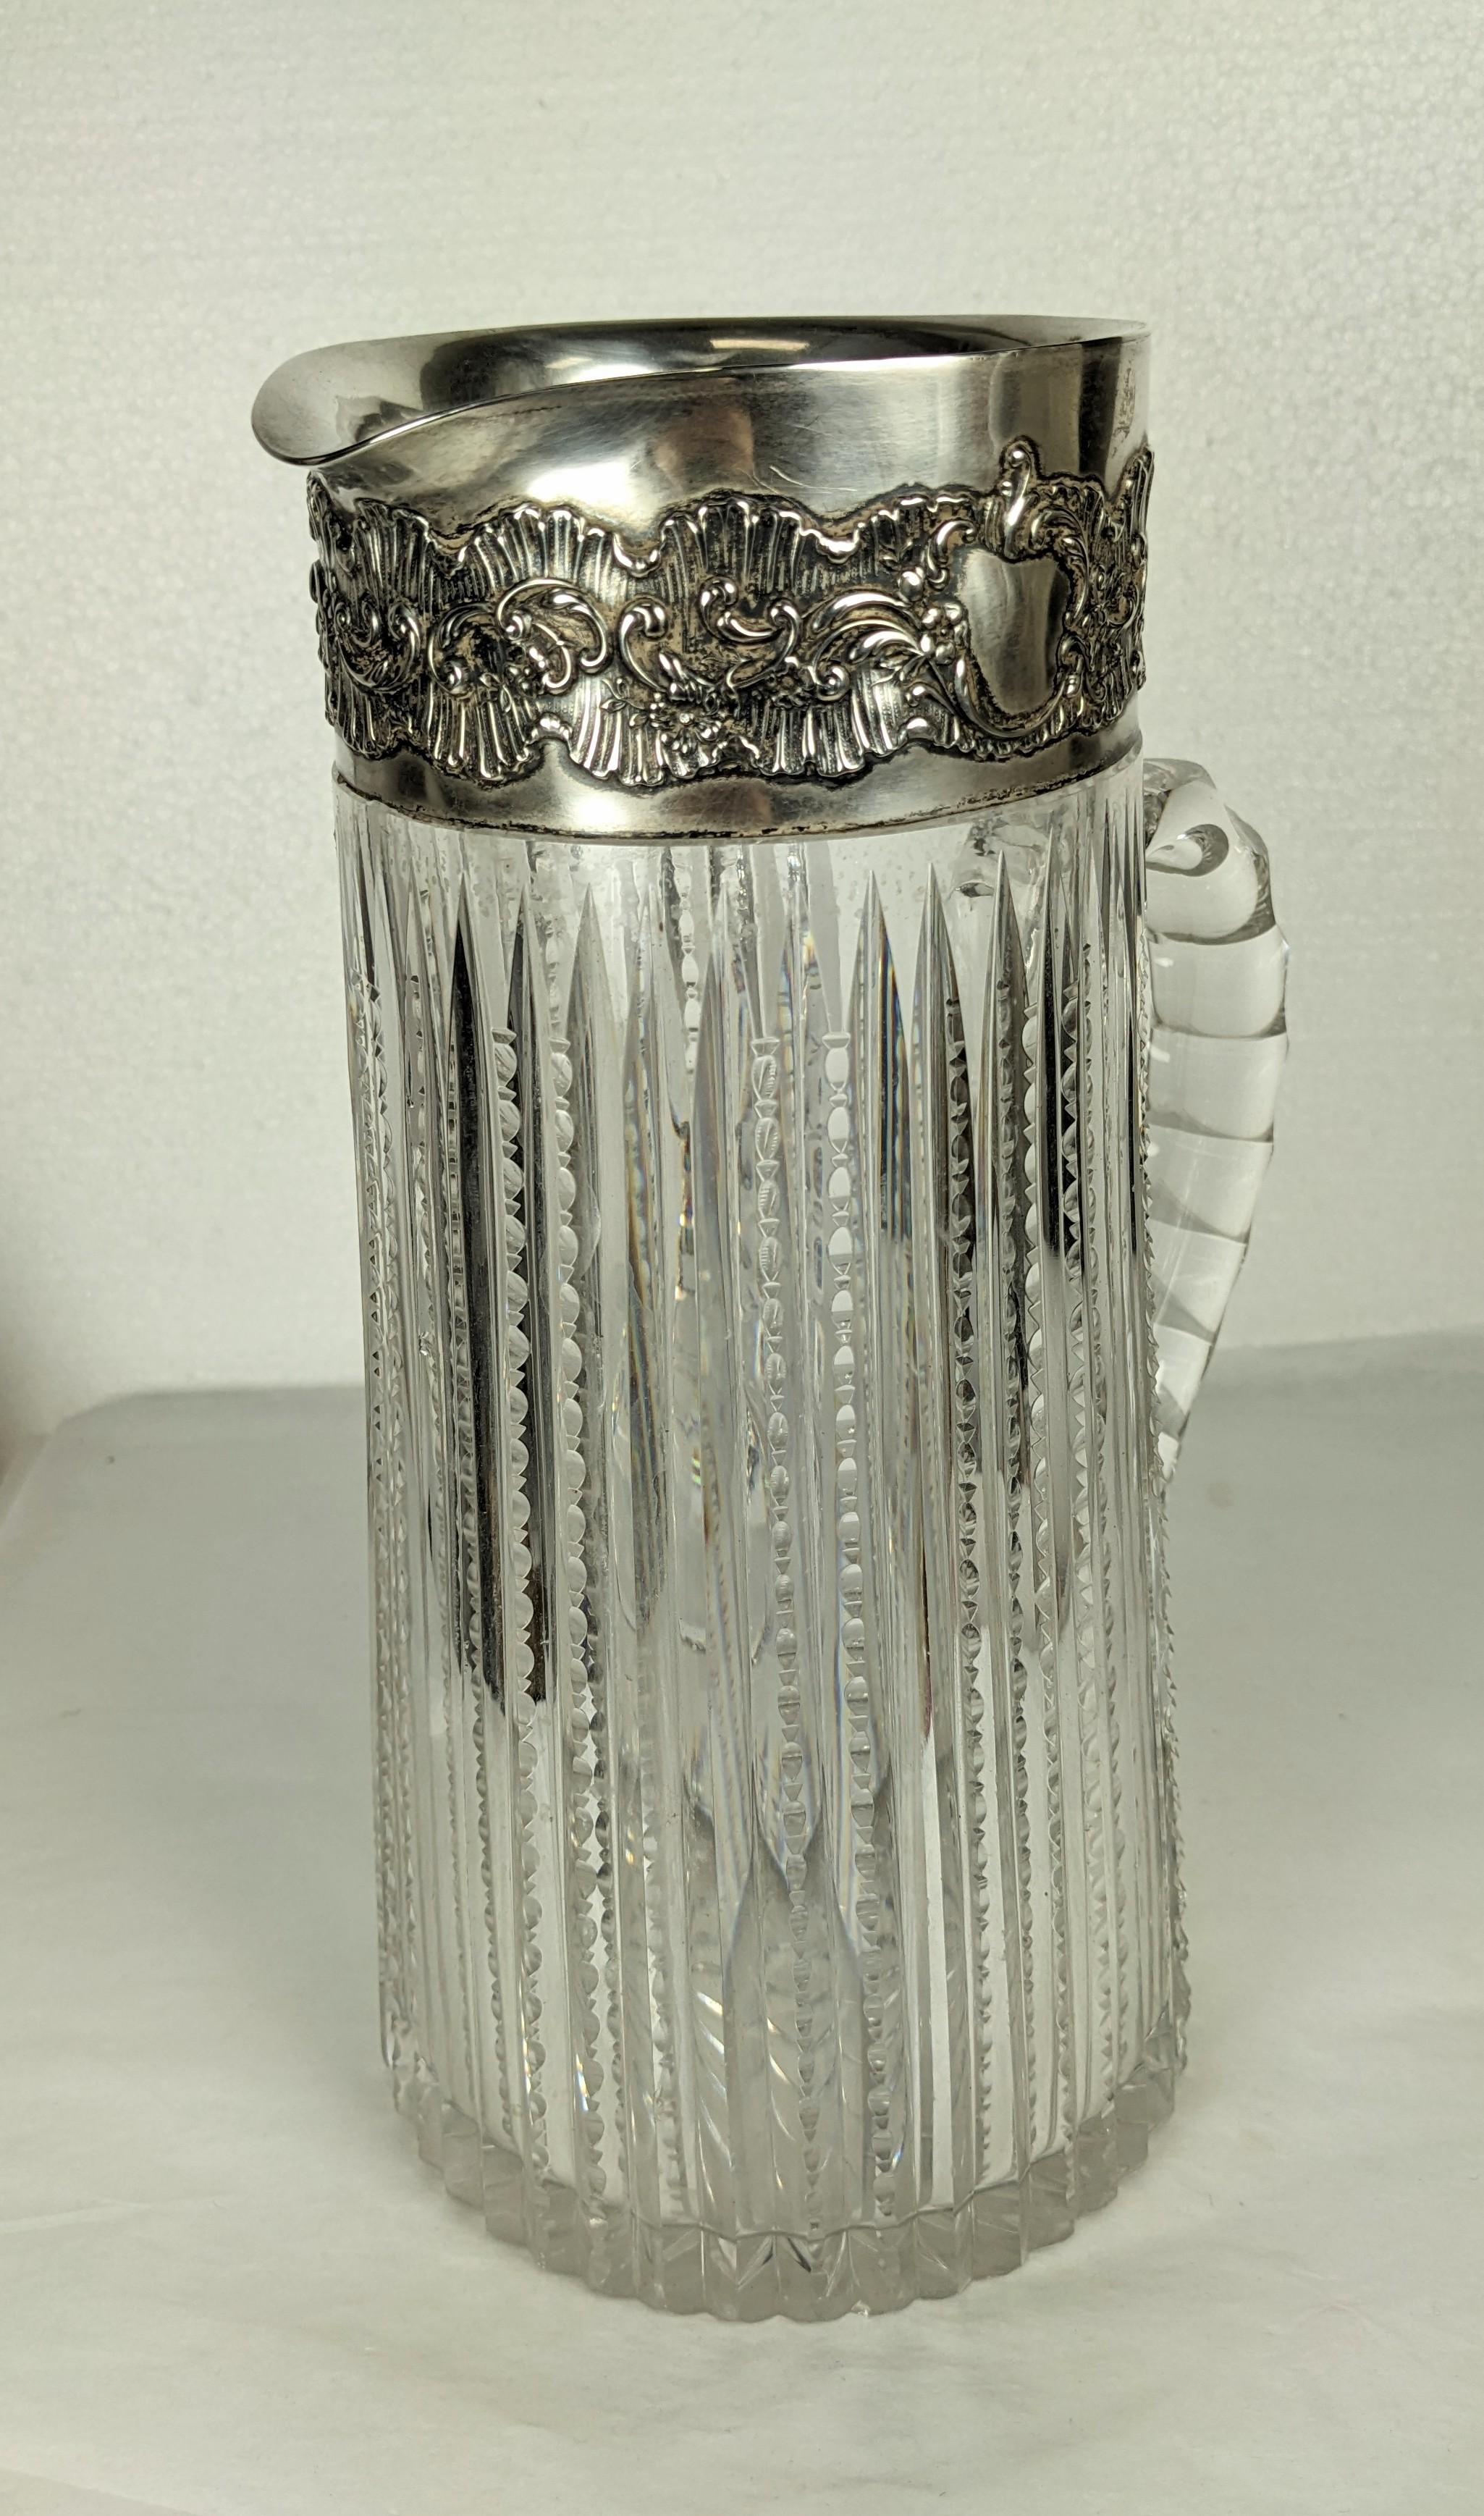 Elegant Edwardian Sterling Trimmed Cut Crystal Pitcher from the late 19th, early 20th Century. Striated Cut crystal carved with small divet patterns which are echoed on the handle. Sterling rim with Victorian floral panel. 1880s-1900's USA. 
Marked